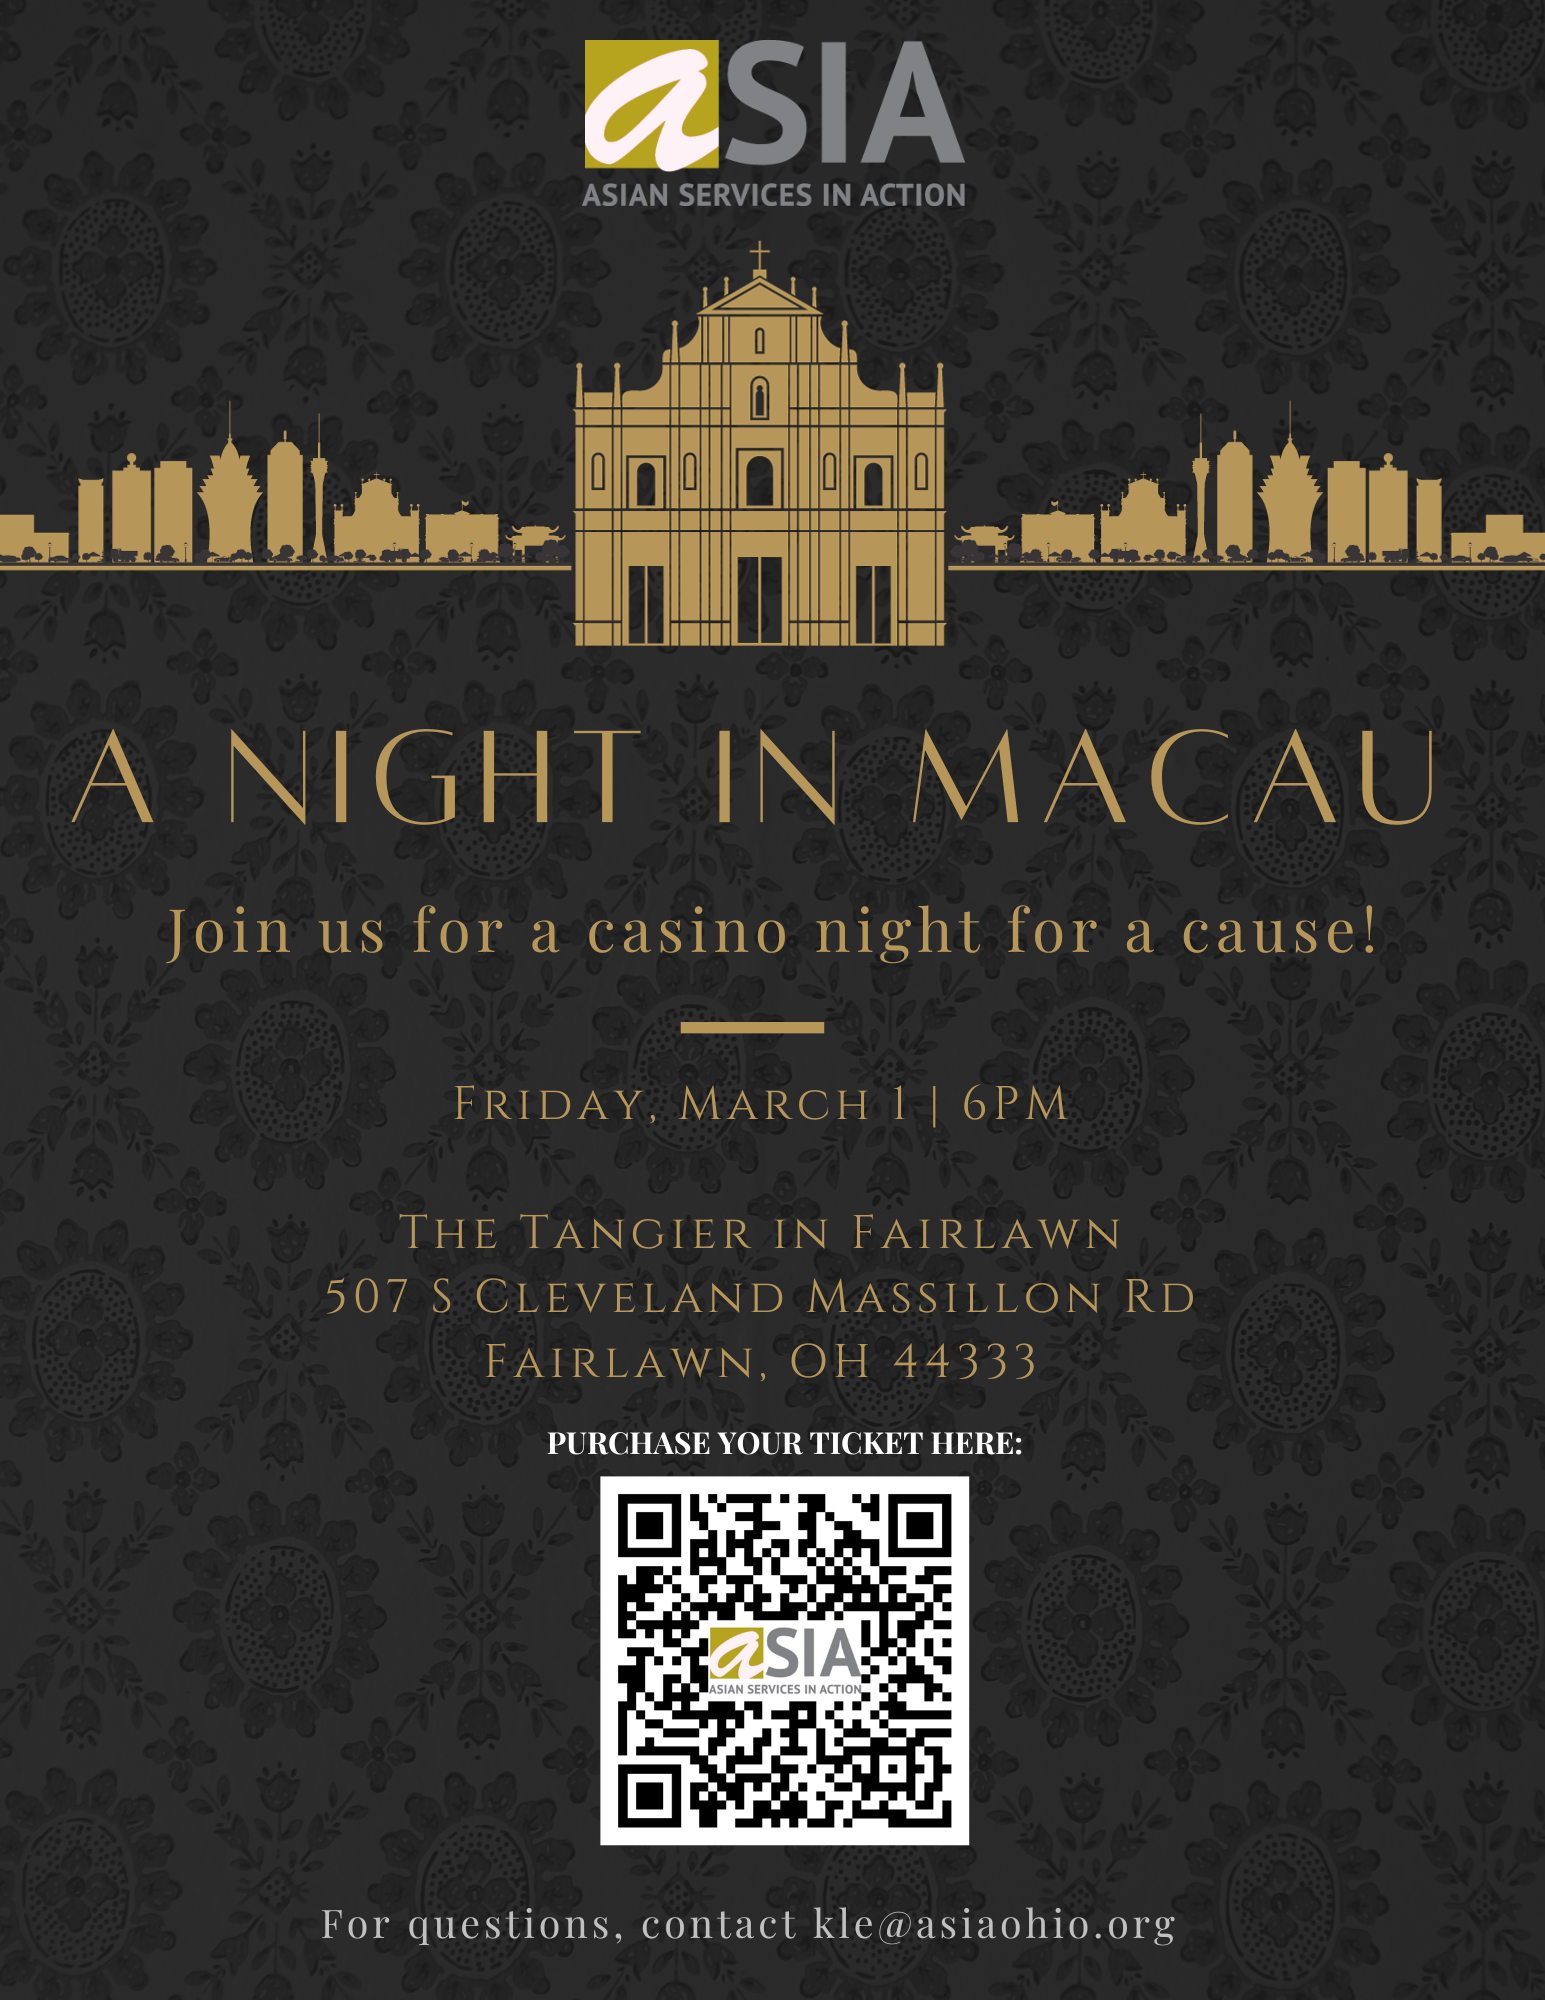 A Night in Macau Flyers & Promotionals